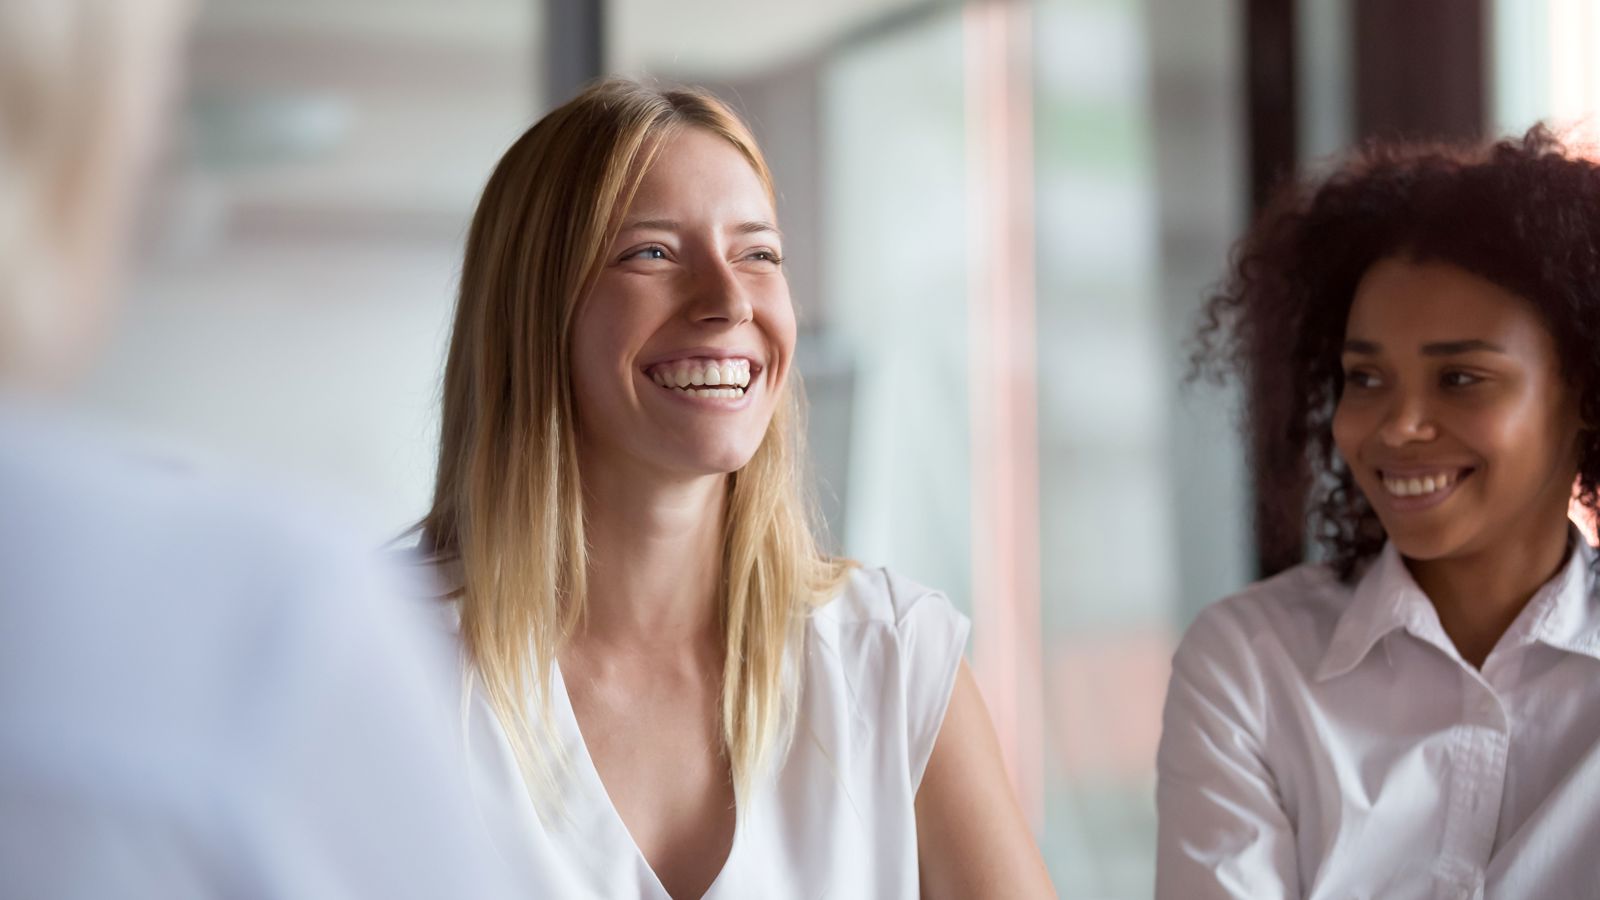 Two women smiling in a meeting situation